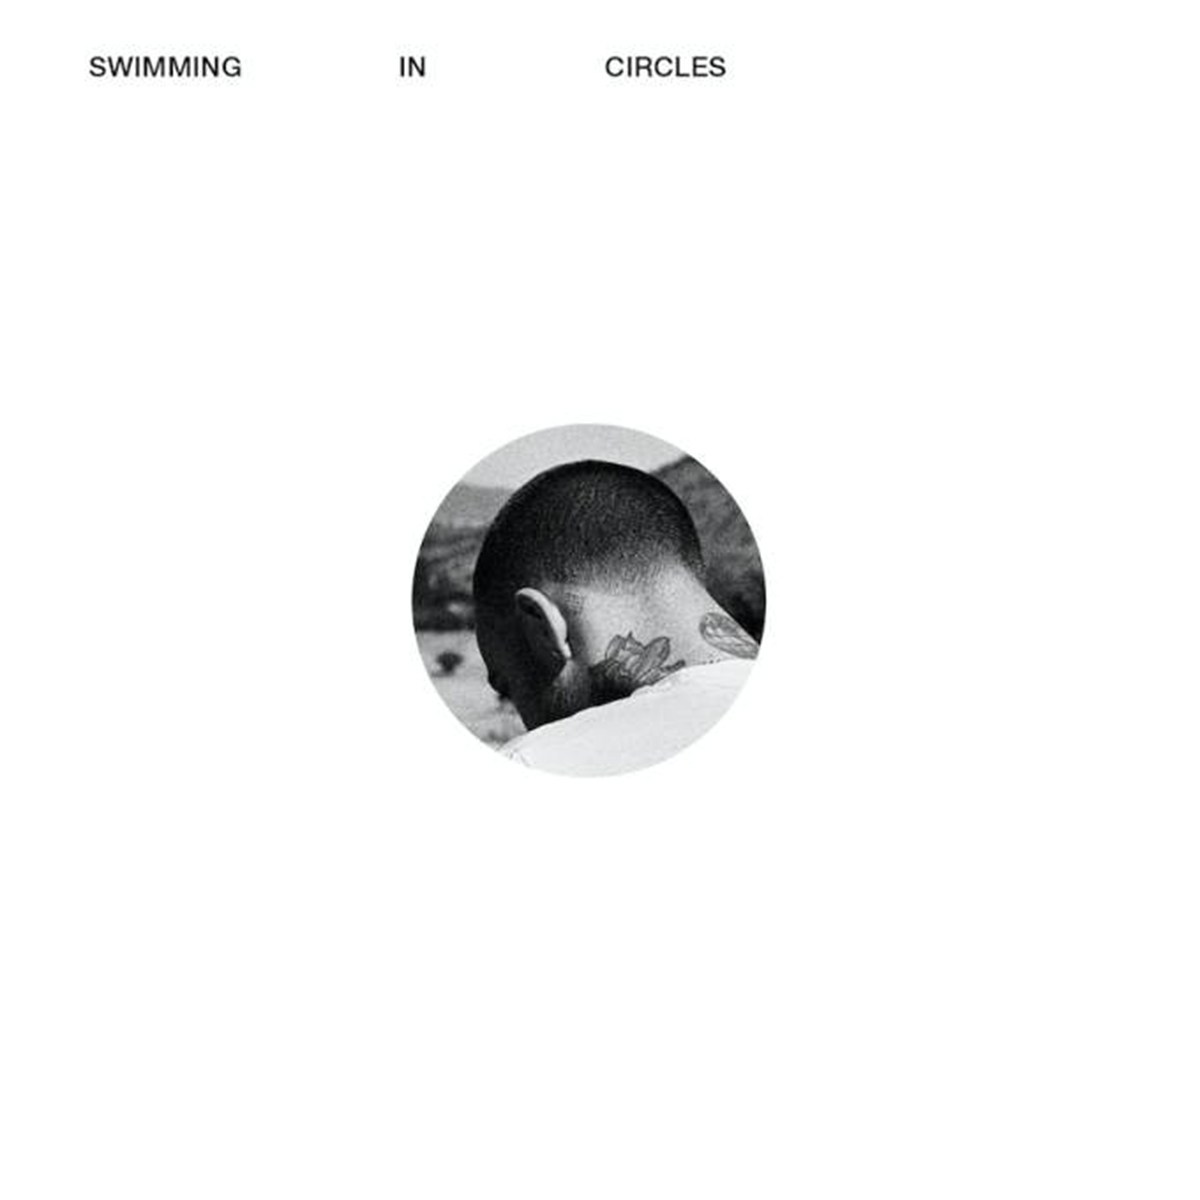 Mac Miller's Swimming and Circles collected in new vinyl box set